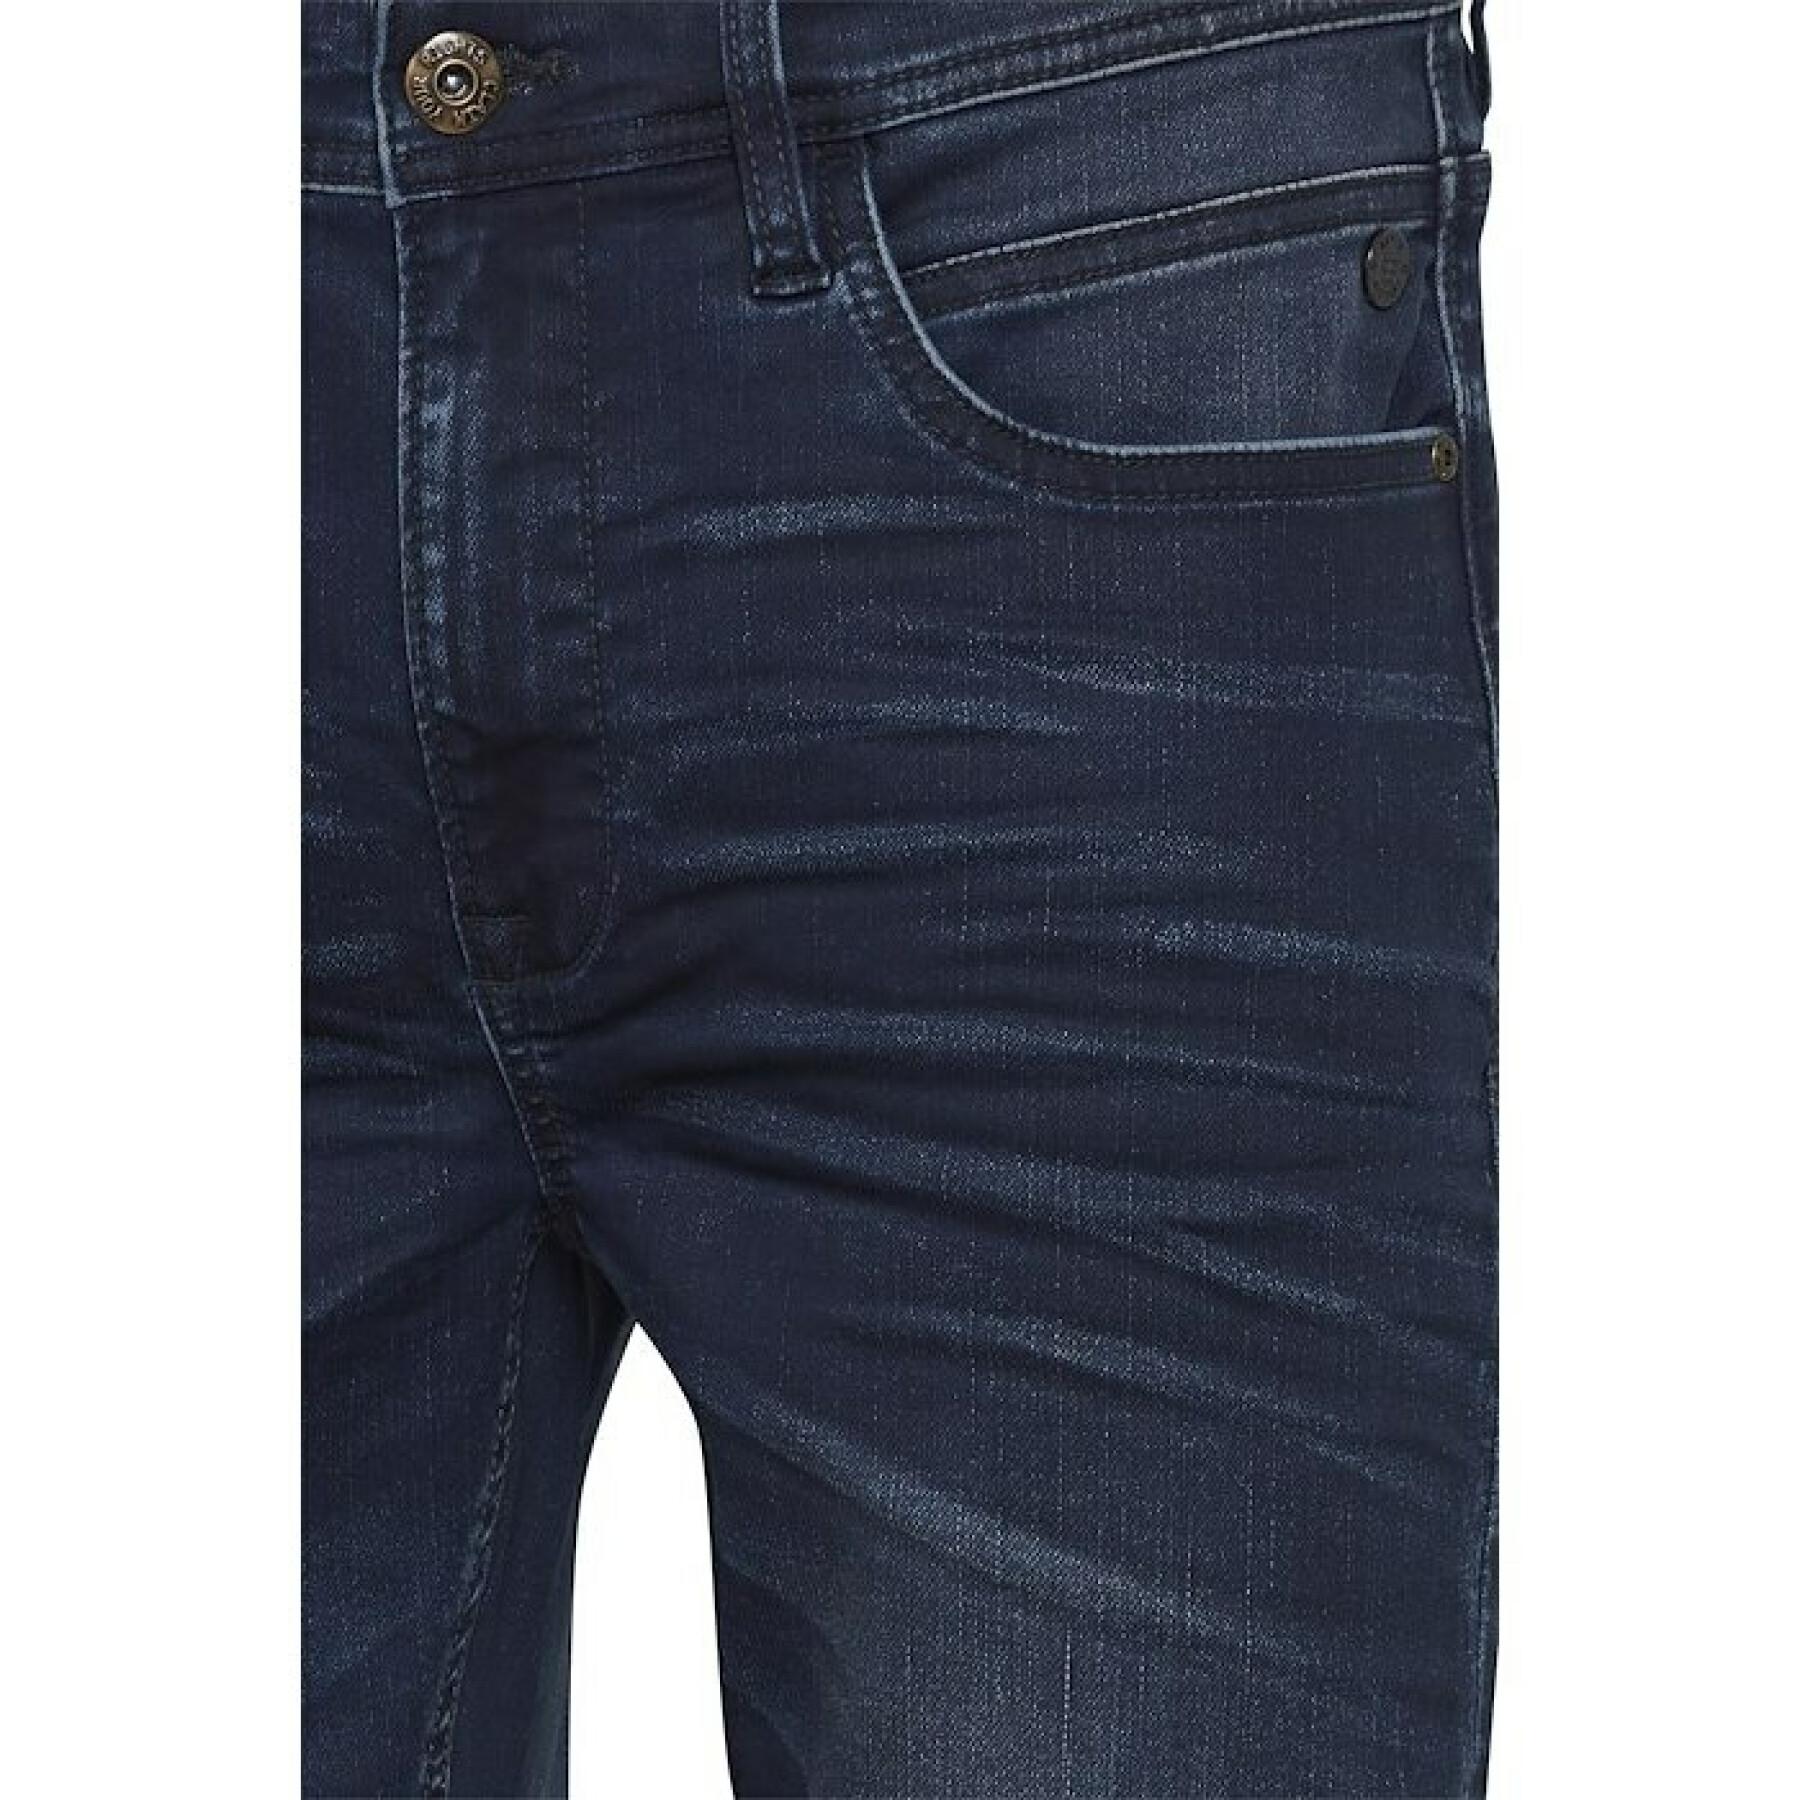 Women's tapered jeans Blend Jet - Jogg